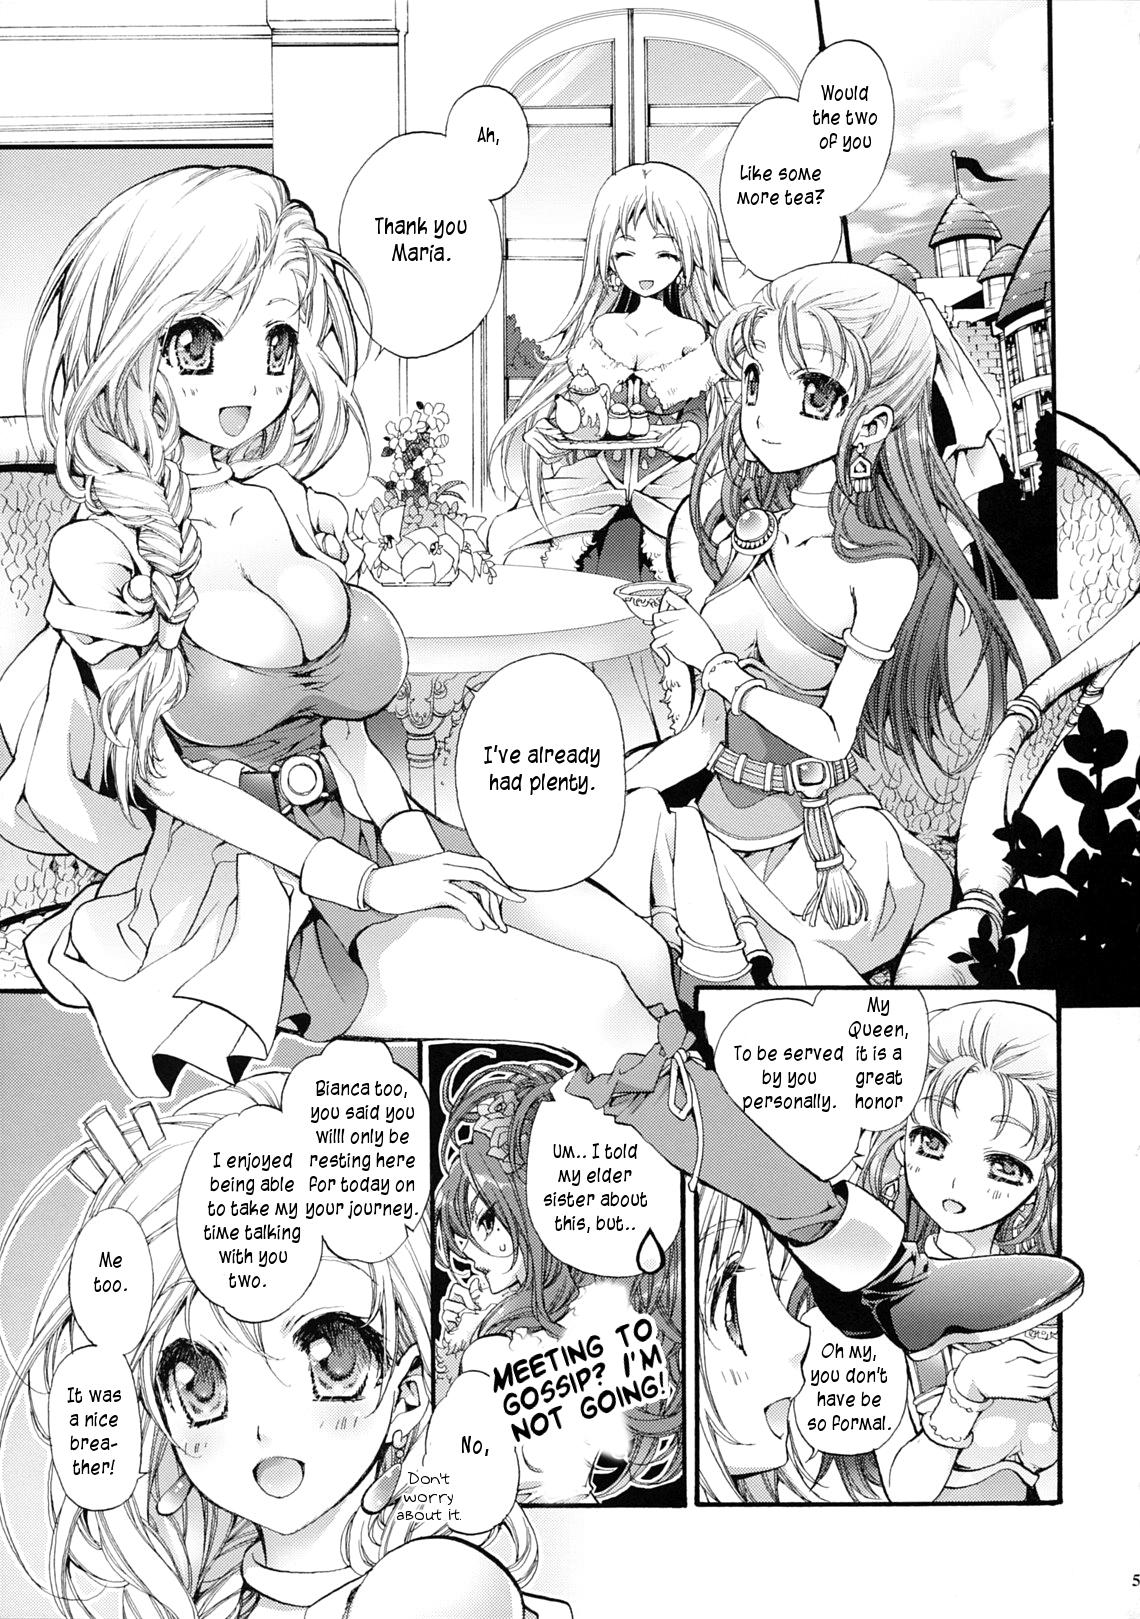 Dirty Hitomi no Naka no Sora | The Sky In Your Eyes - Dragon quest v Gloryhole - Page 4